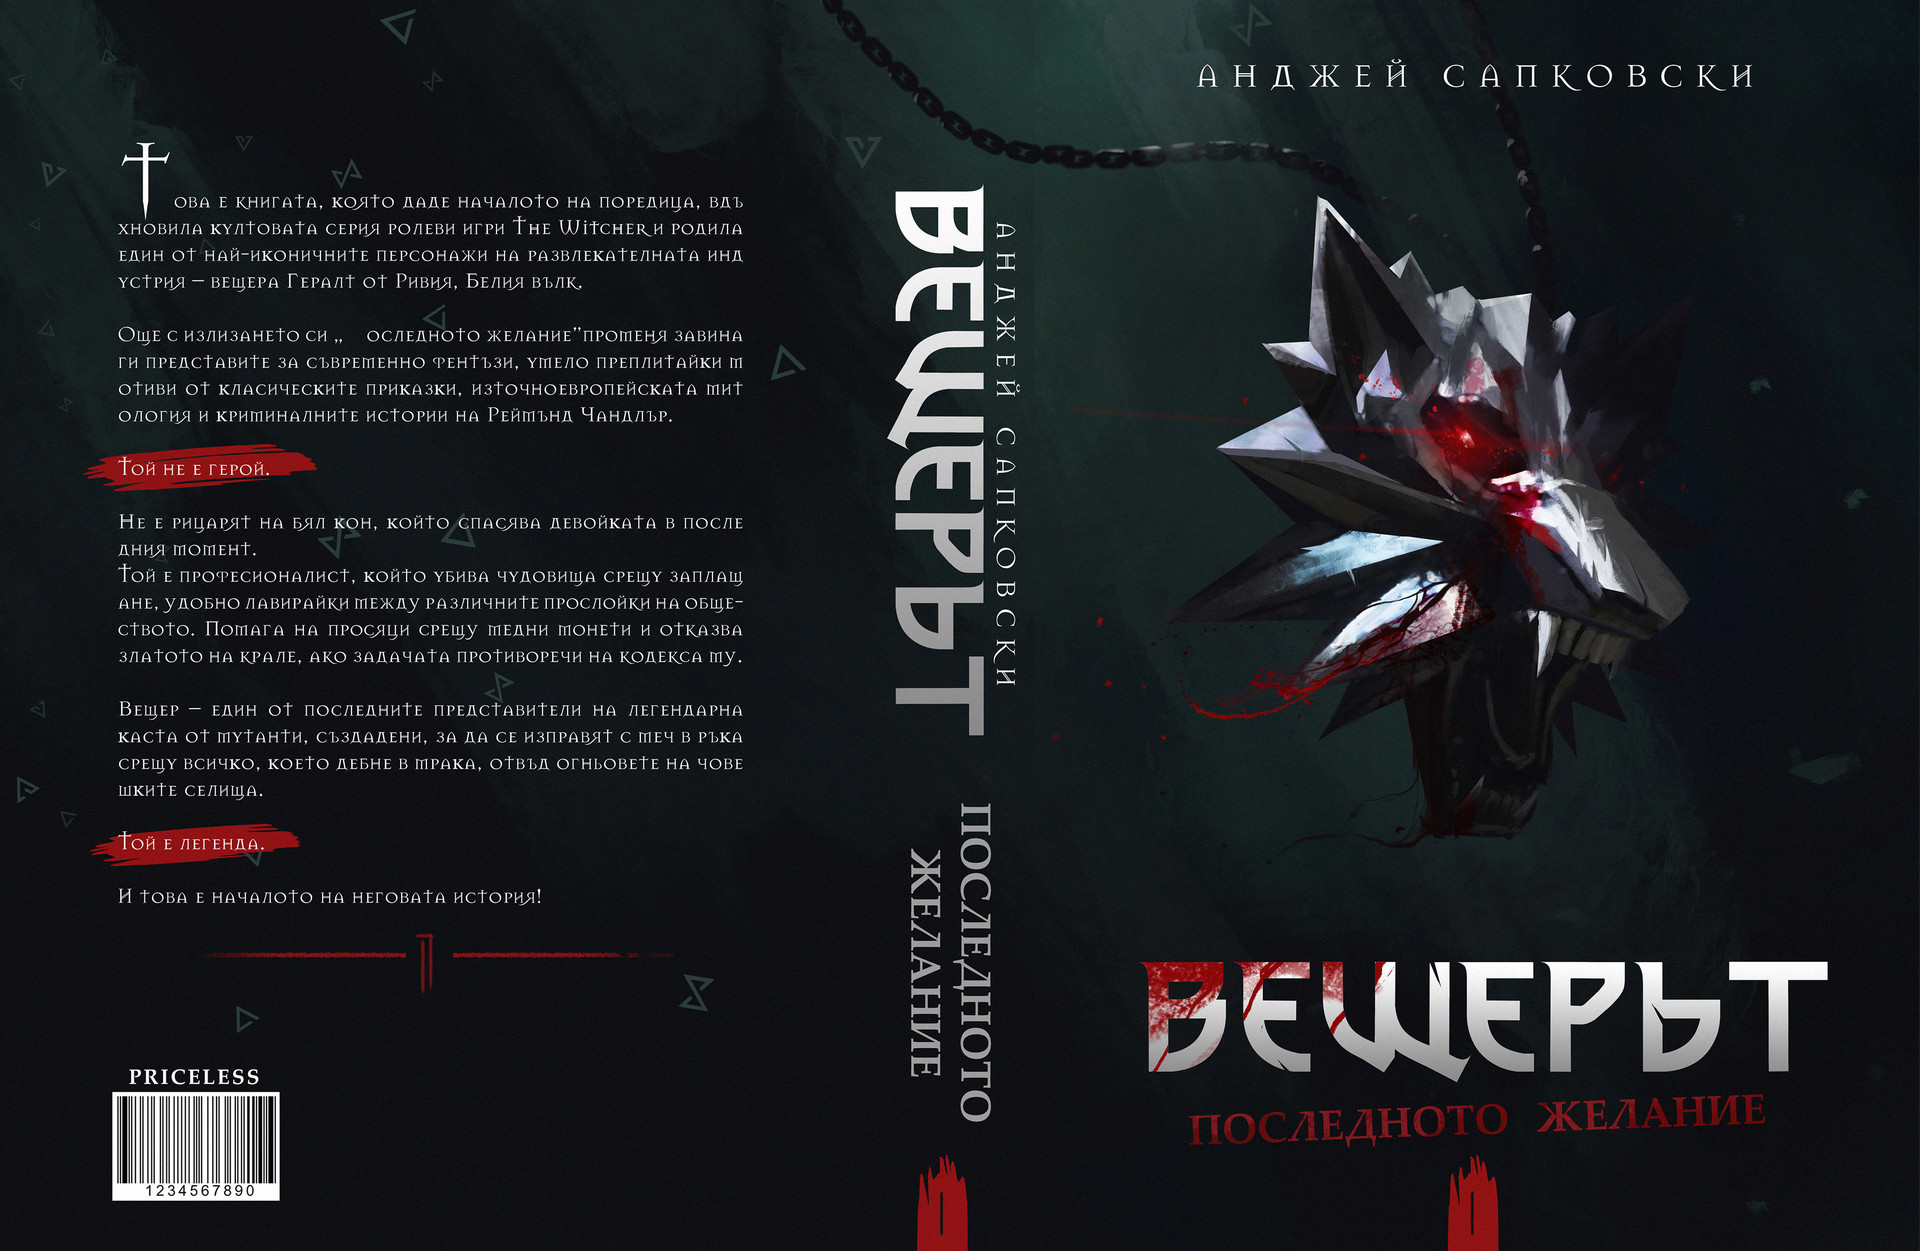 Here is my take on the bulgarian book cover of... 